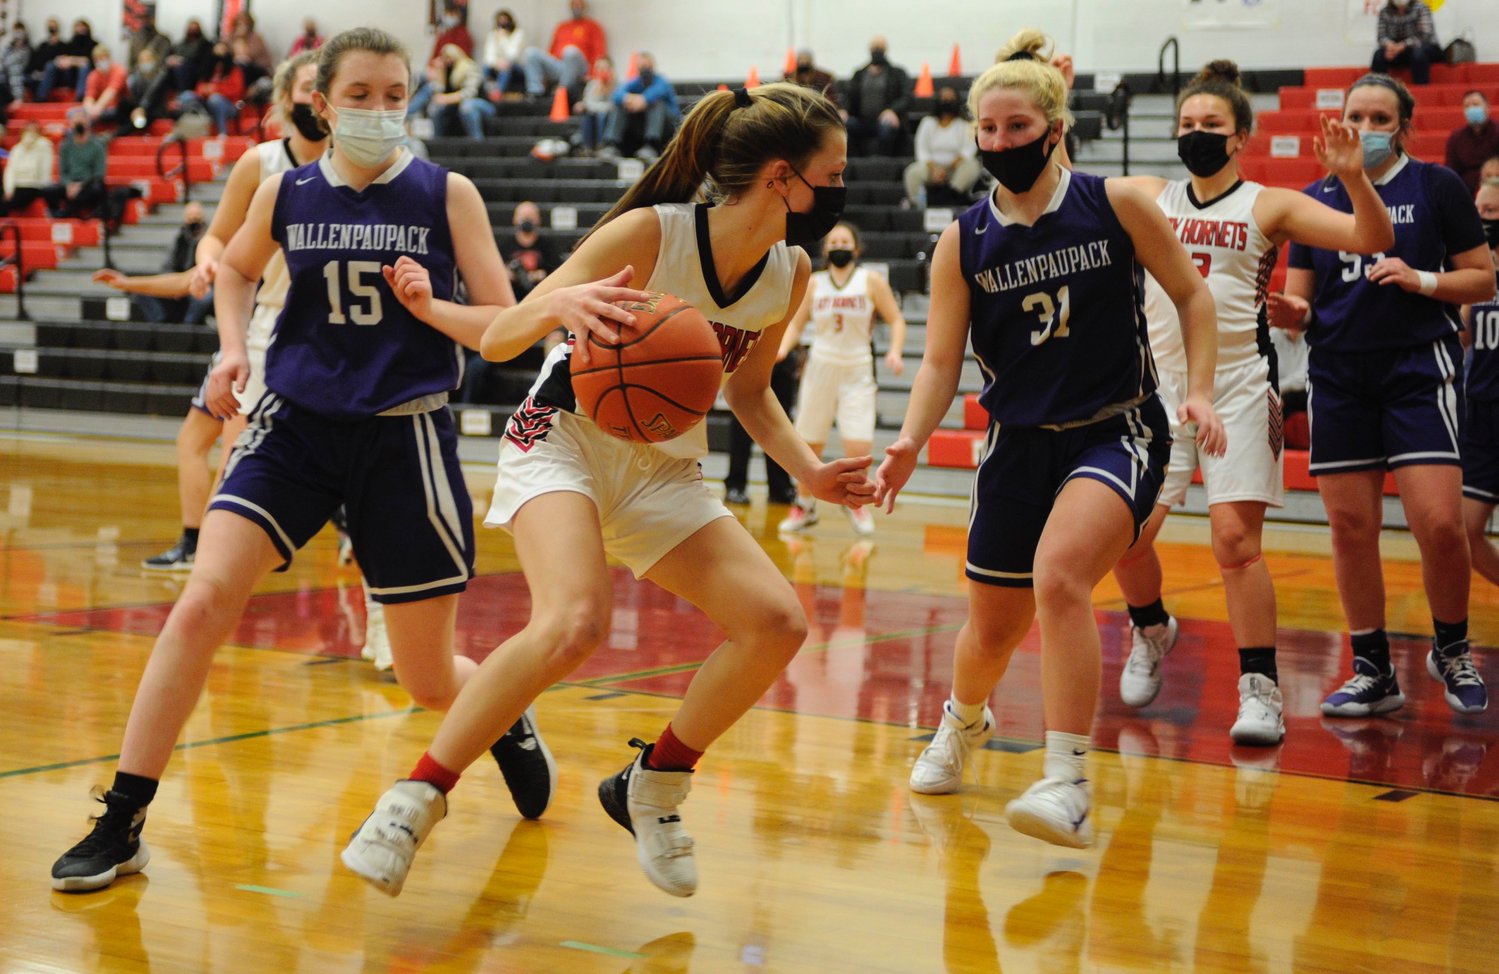 Airborne. Honesdale’s Katie Ludwig gets a little air under her sneakers as she splits the Lady Buckhorns defense of Megan Desmet and Aviona Rosenthal. Desmet posted a game high of 26 points.